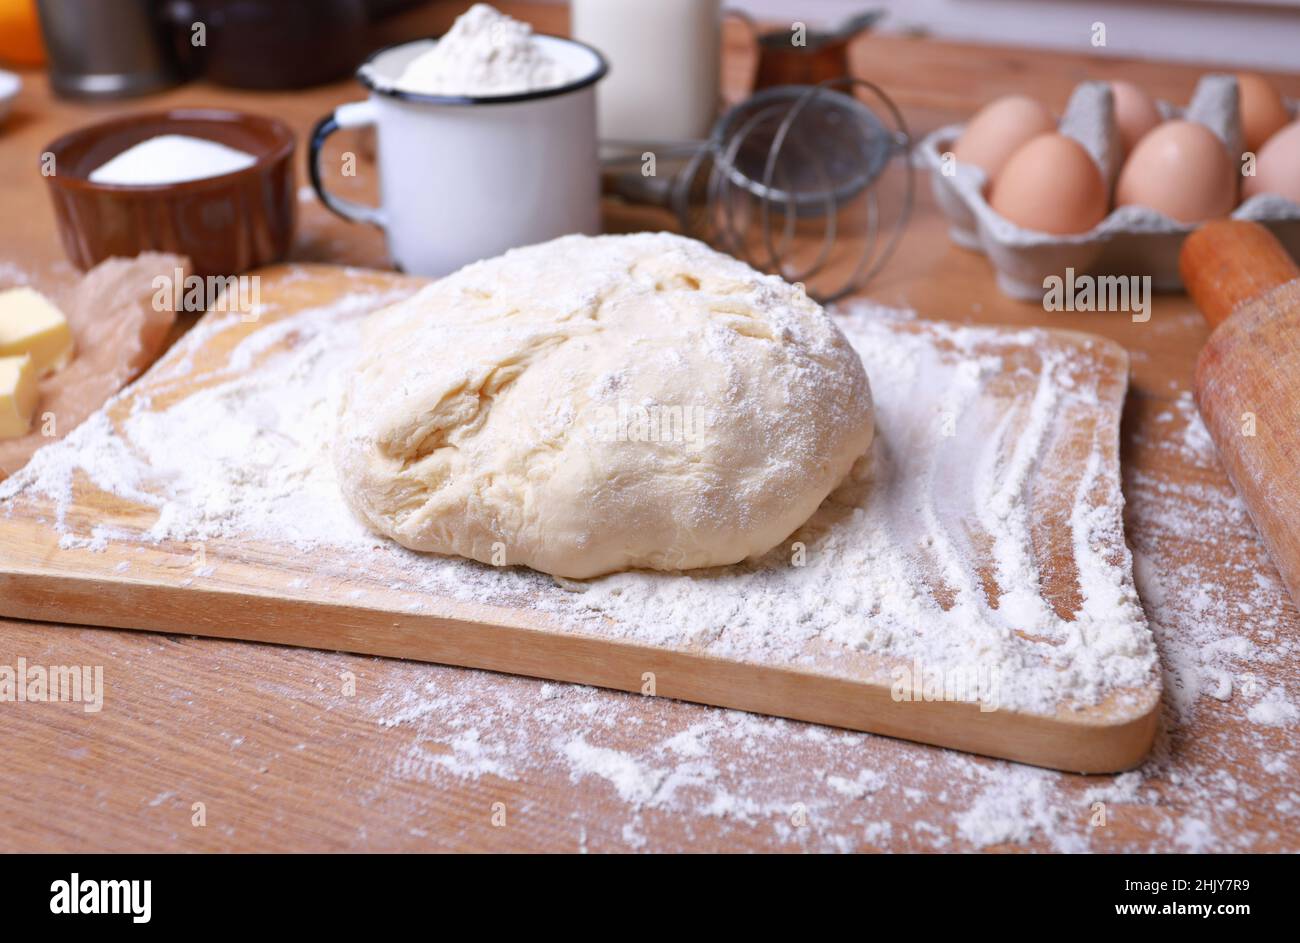 Food bakery concept making bread Stock Photo